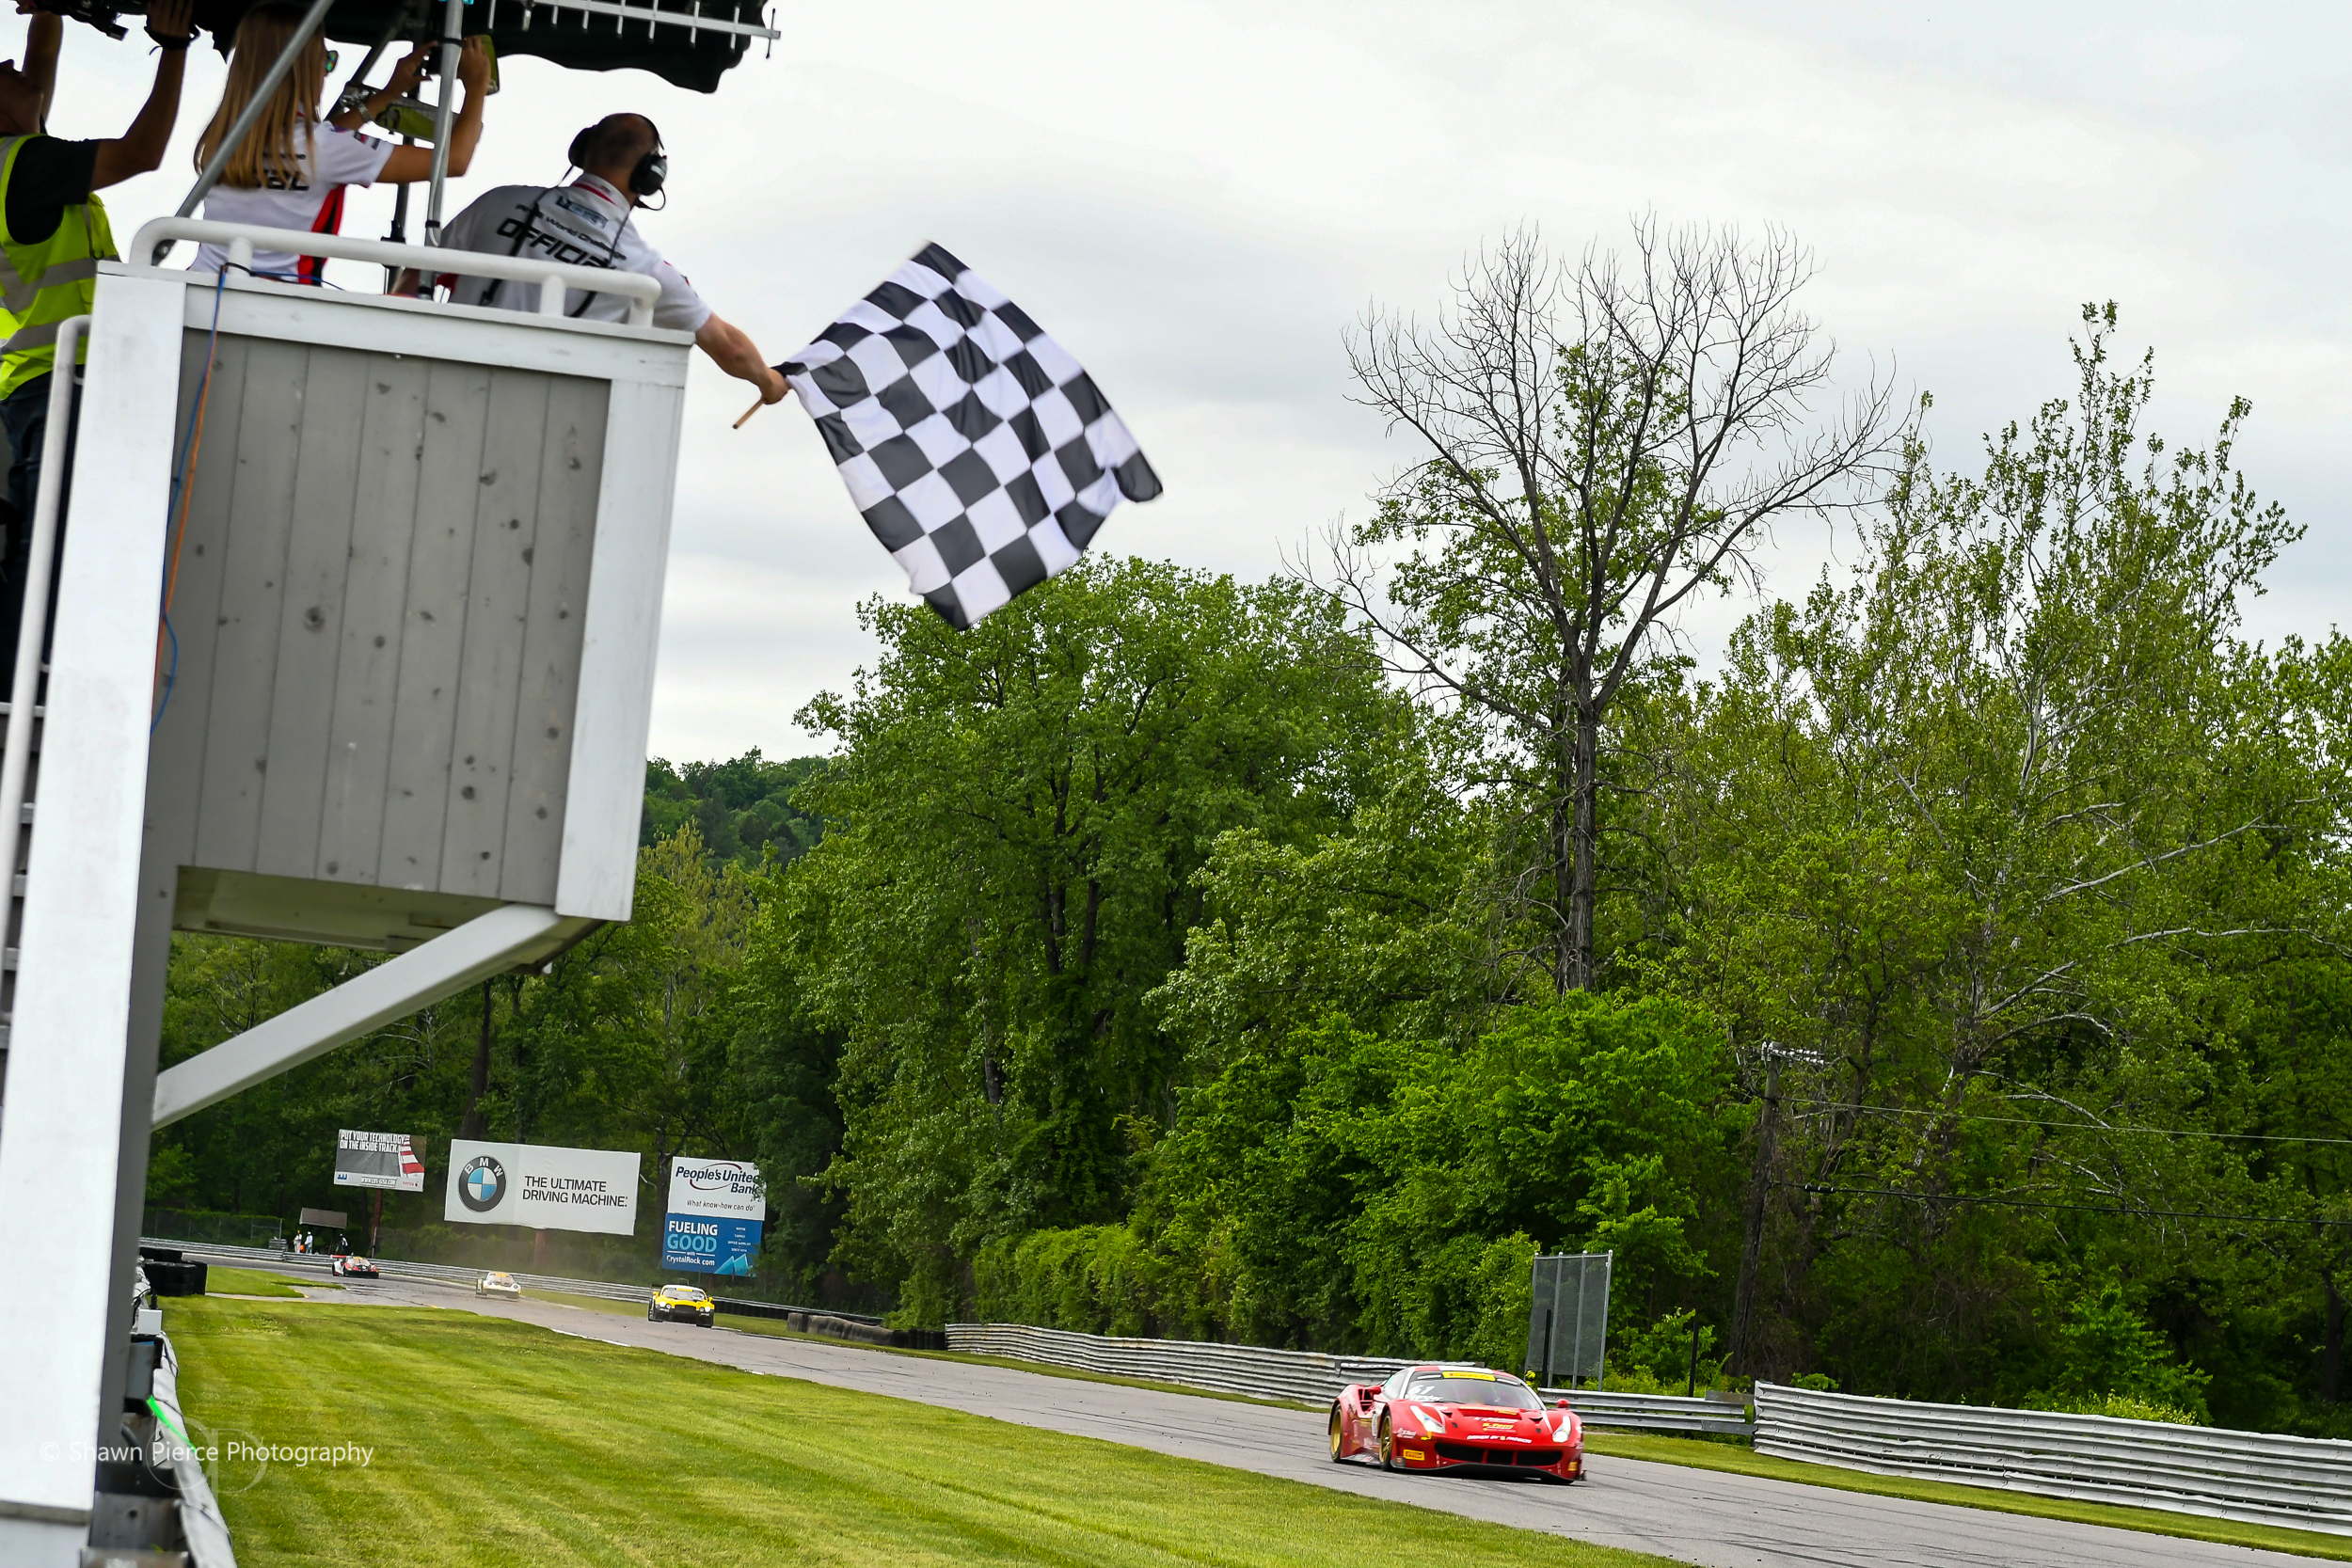  The #61 Ferrari crosses the finish line first to take the final checkered flag of the weekend.  